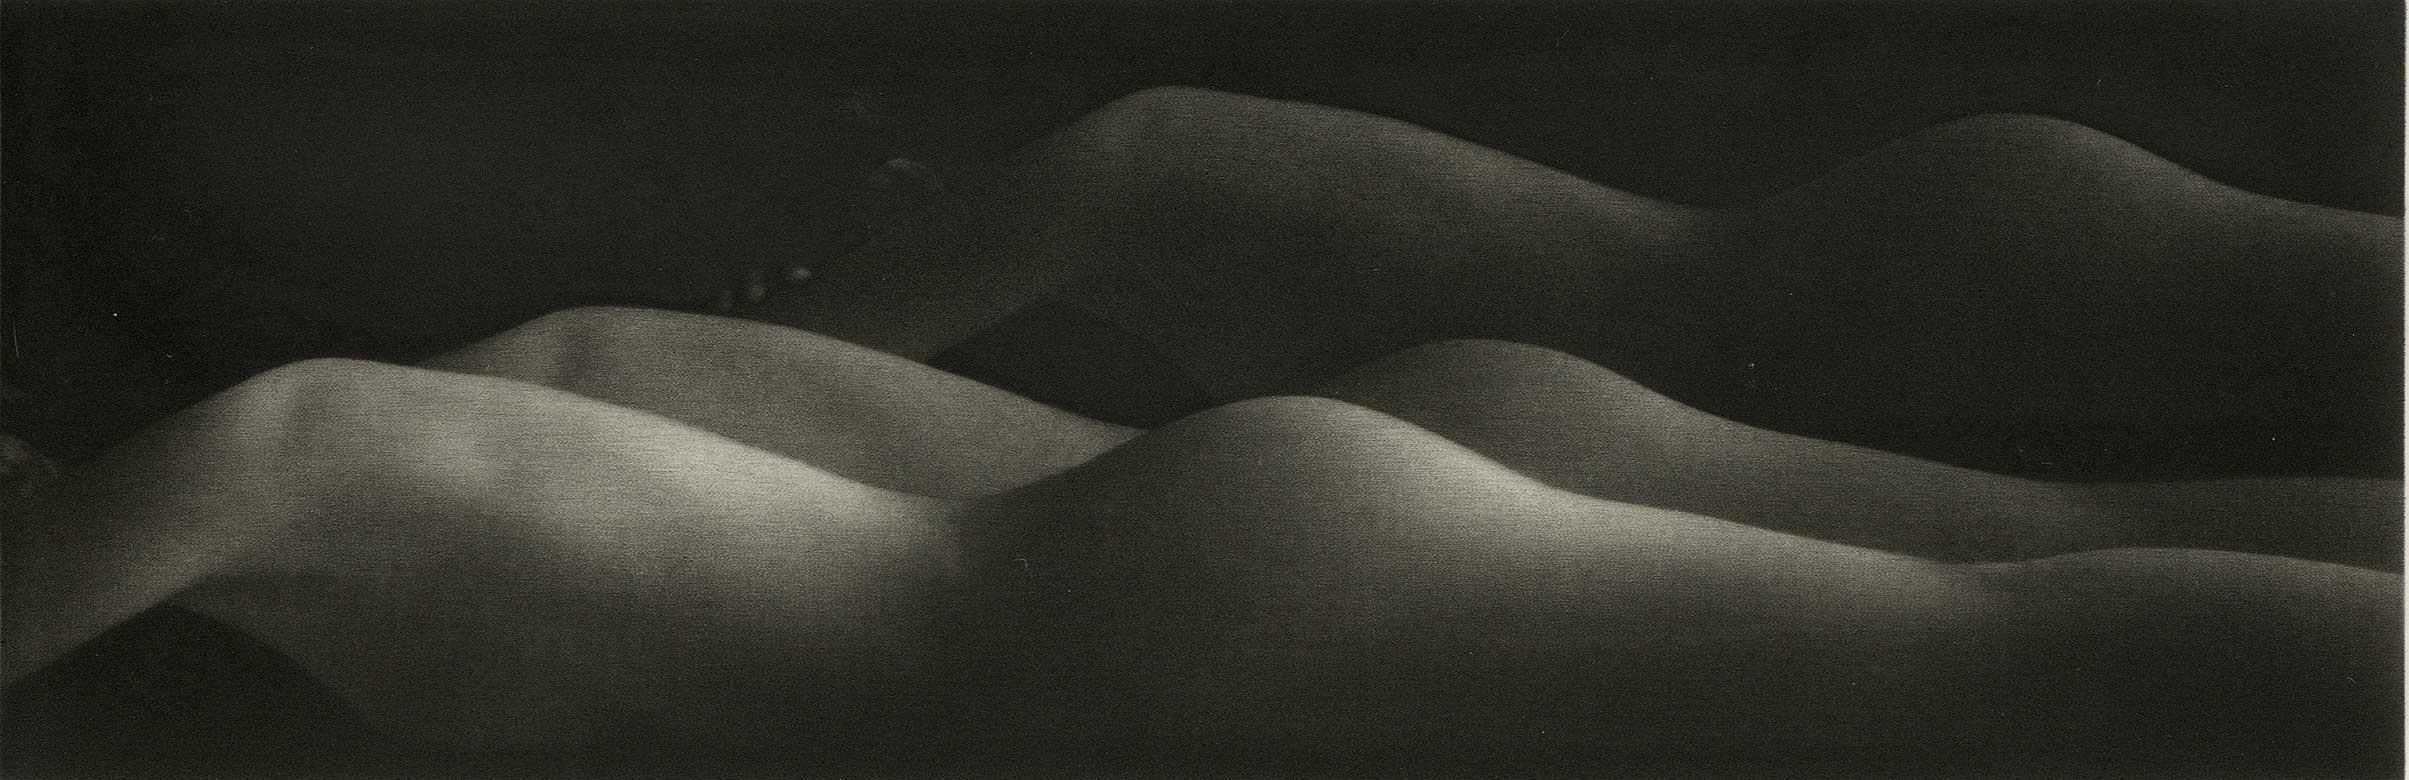 Mikio Watanabe Nude Print - Dune (Multiple nude females appear to be a landscape) 